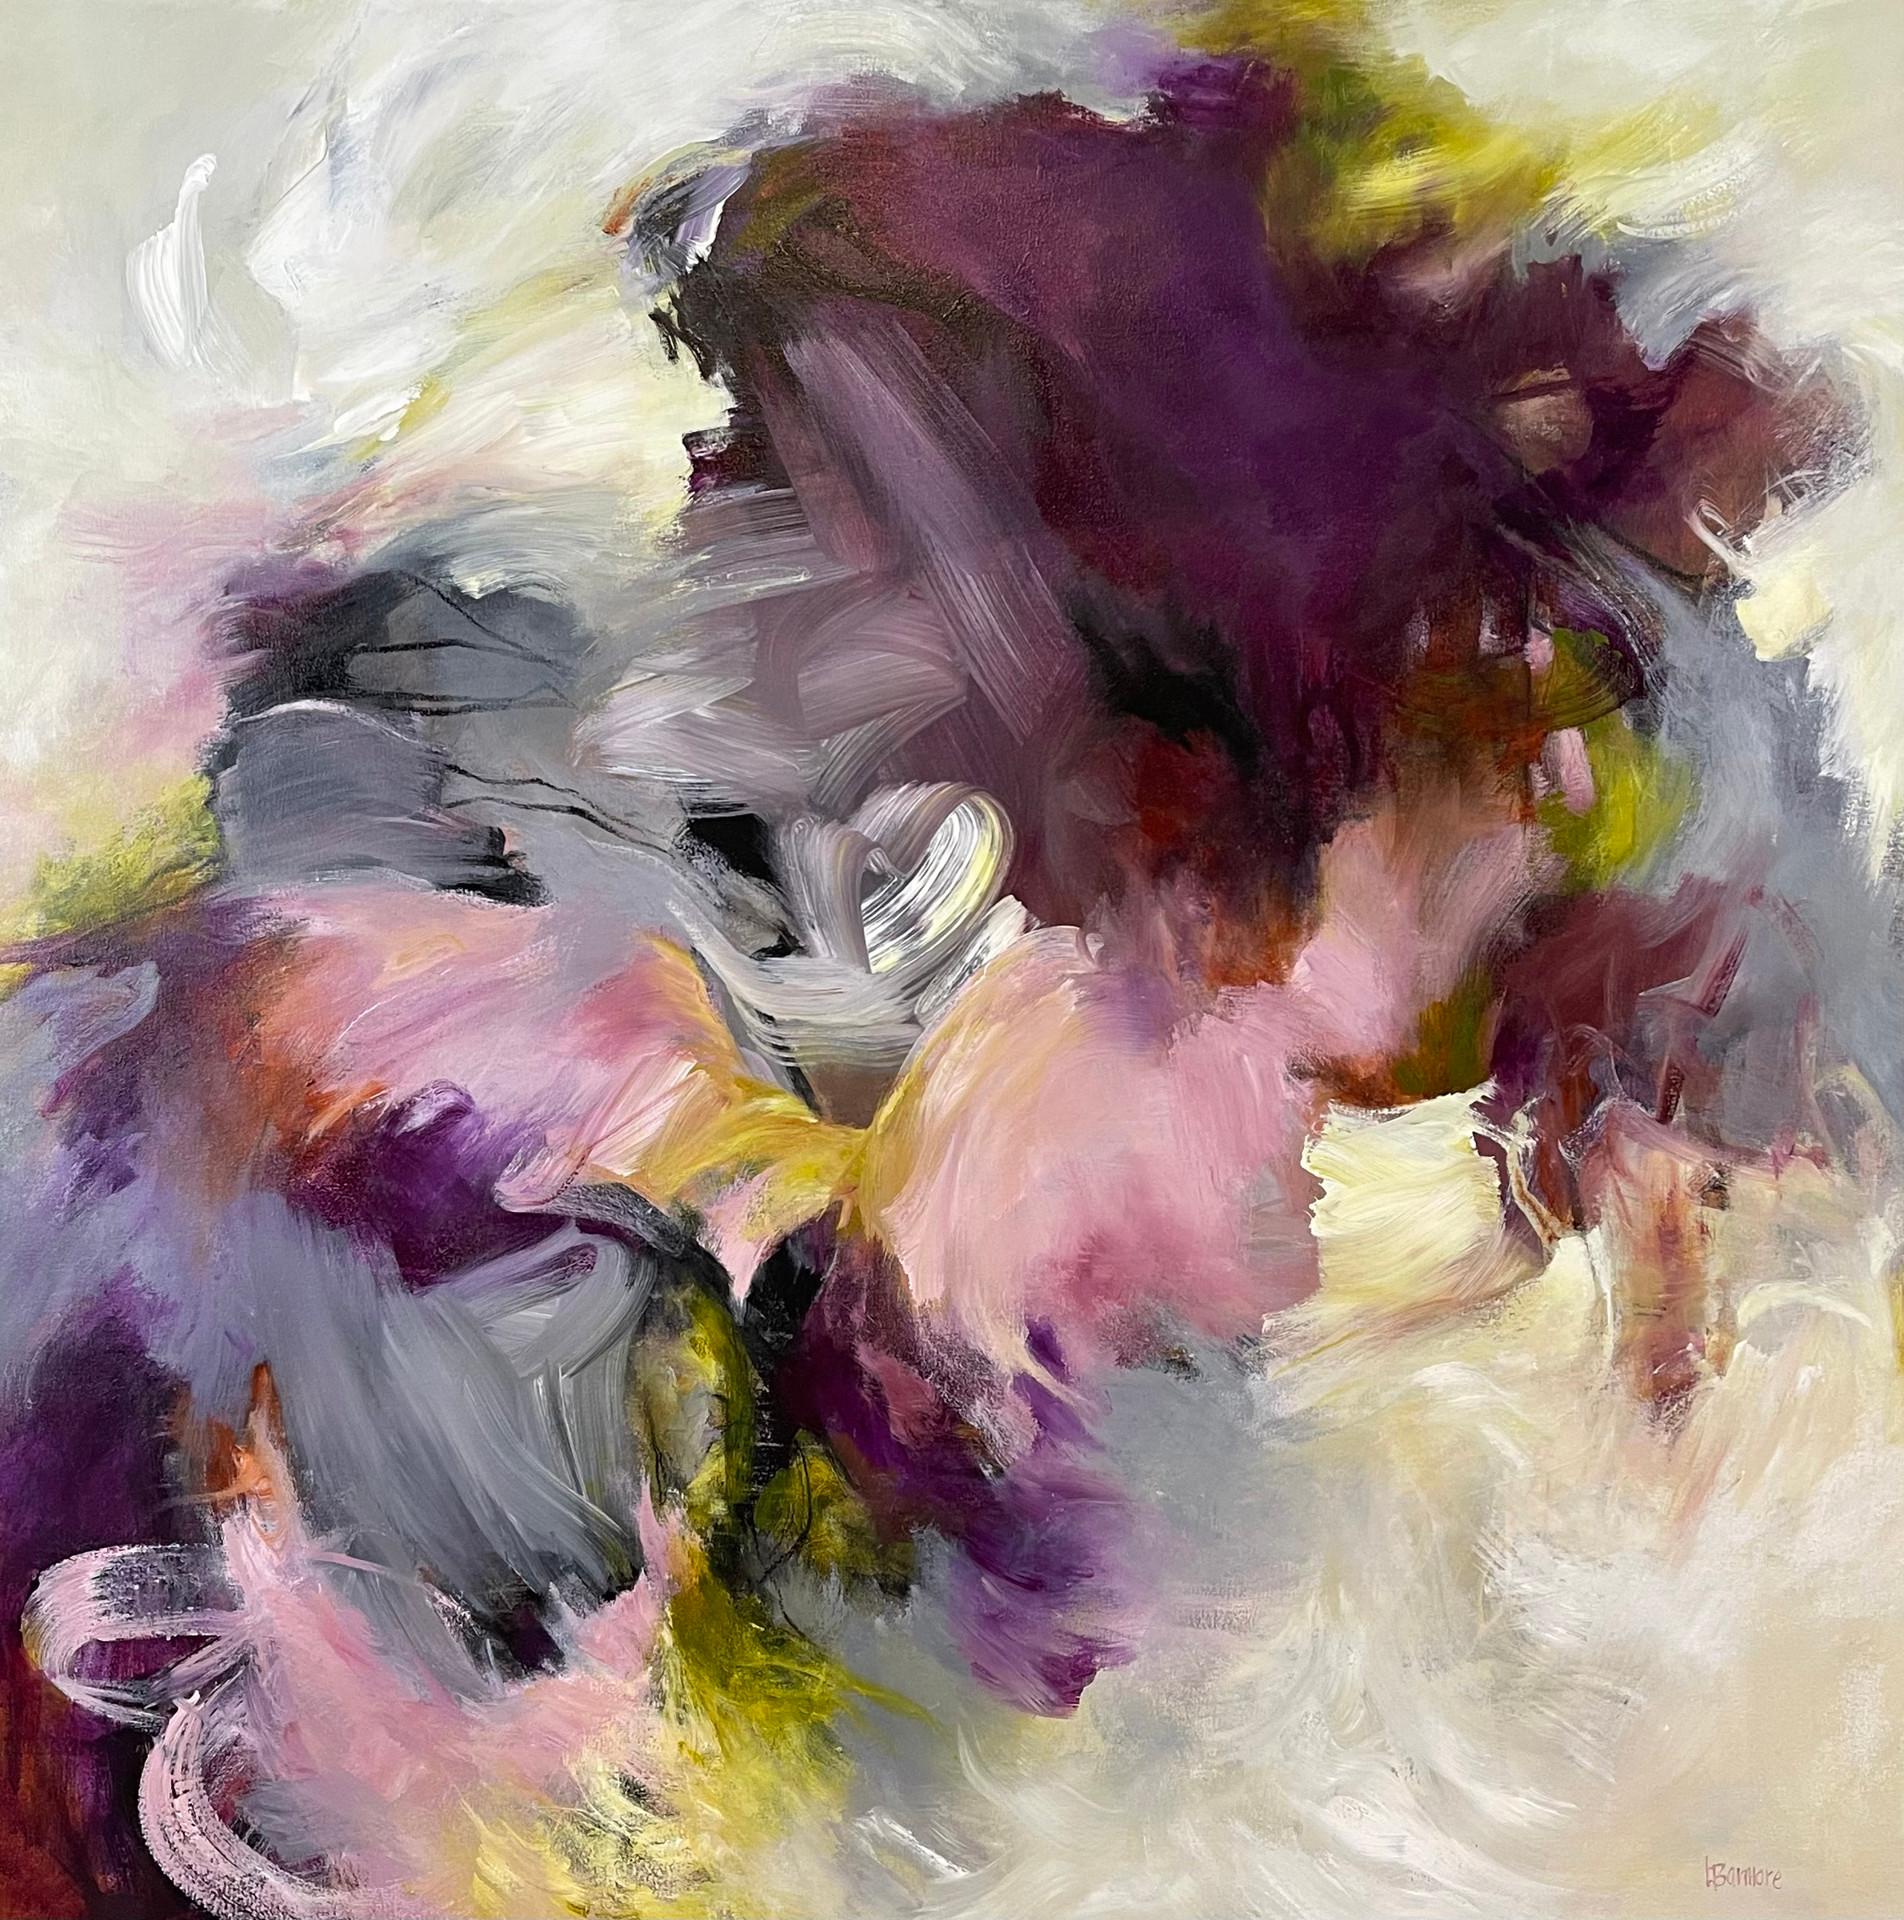 Laurie Barmore Landscape Painting - Swoon -  Stunning Contemporary Abstract Painting Purple+Pink+Black+White+Yellow)